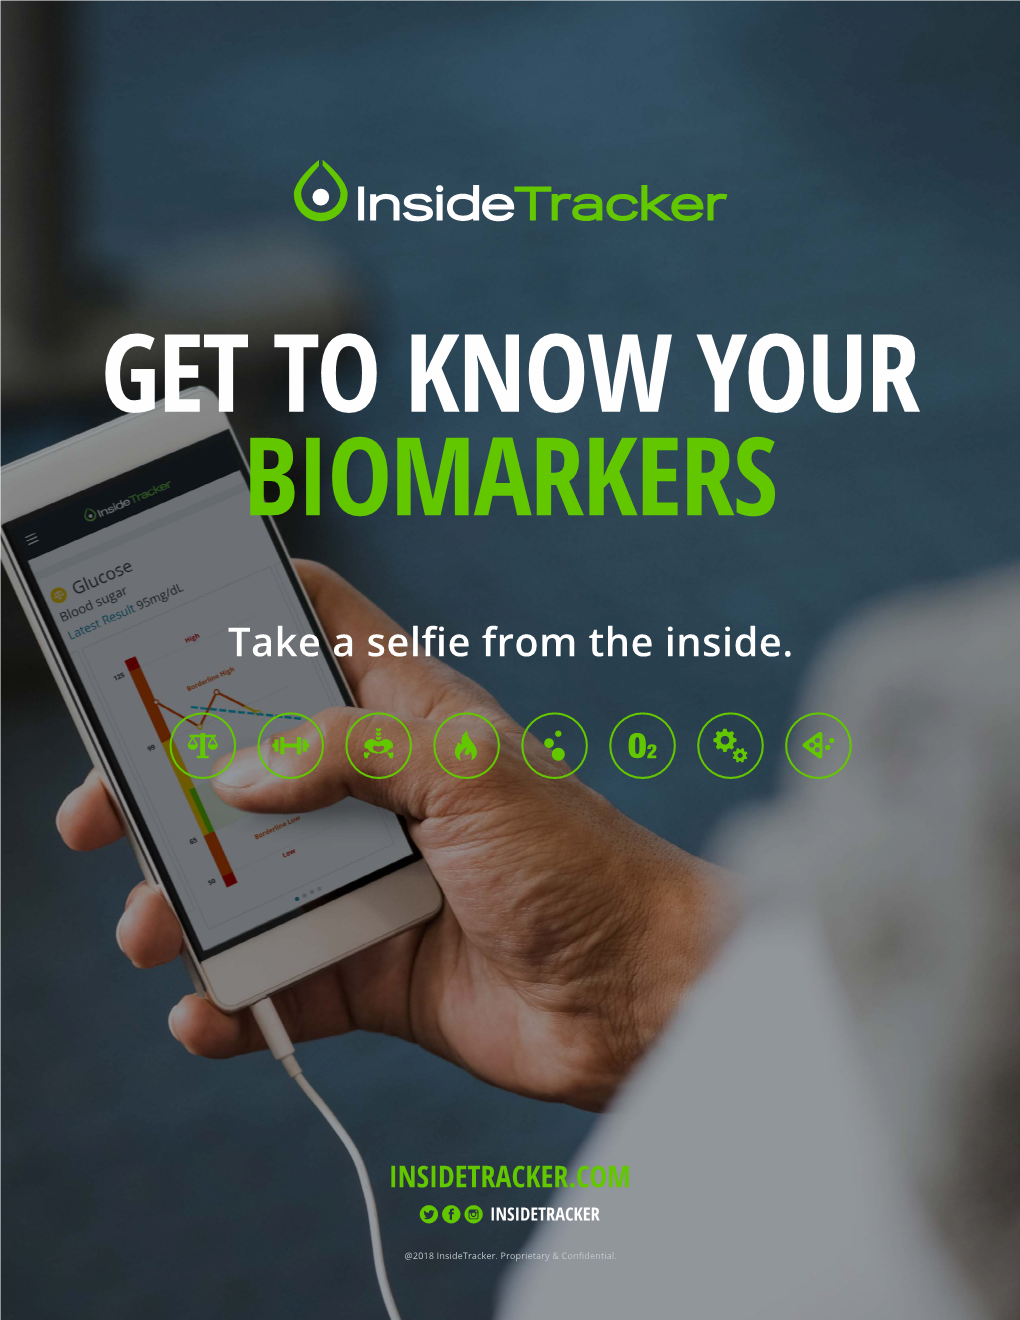 Get to Know Your Biomarkers